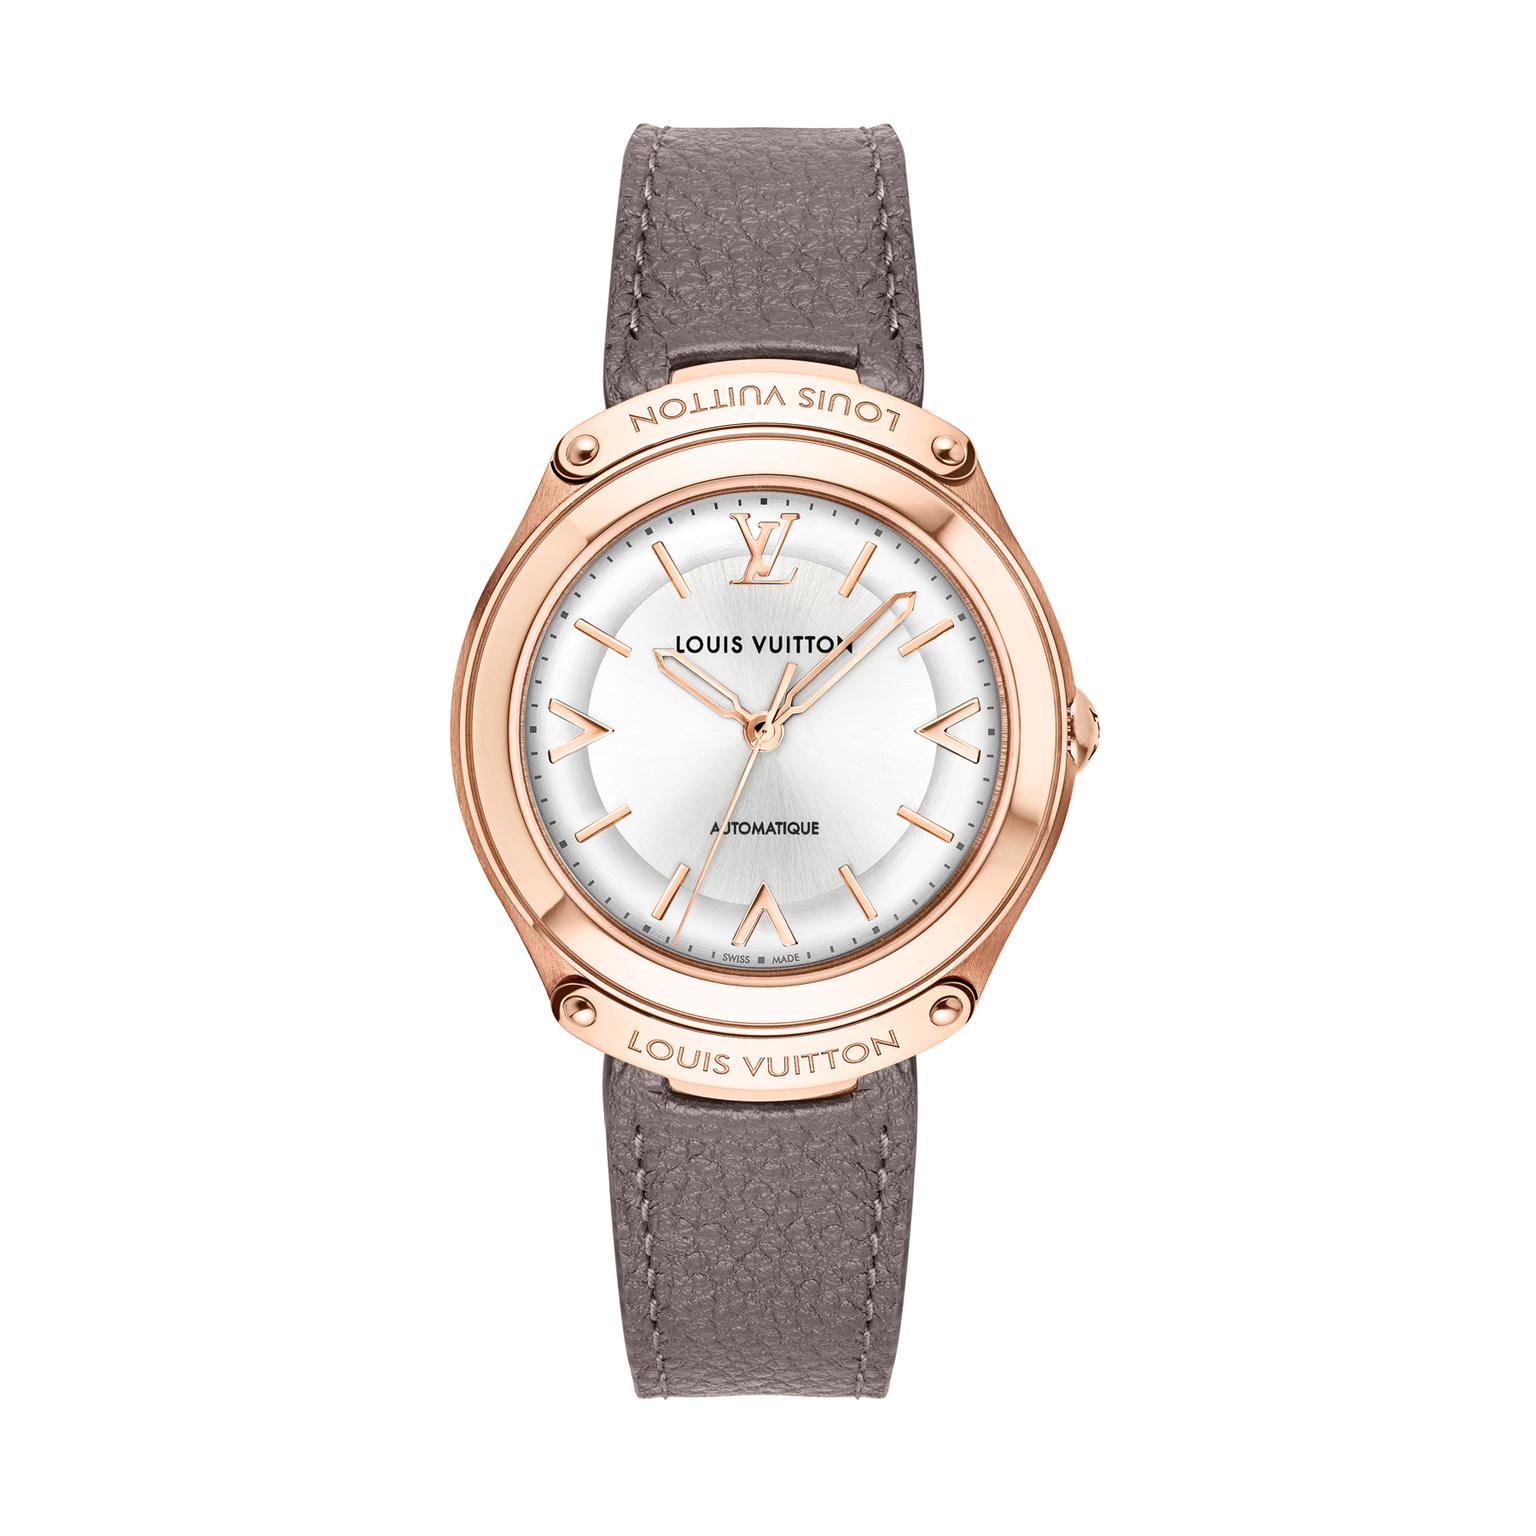 LOUIS VUITTON WOMEN ROSE GOLD-TONED DIAL WATCH at Best Price in Delhi